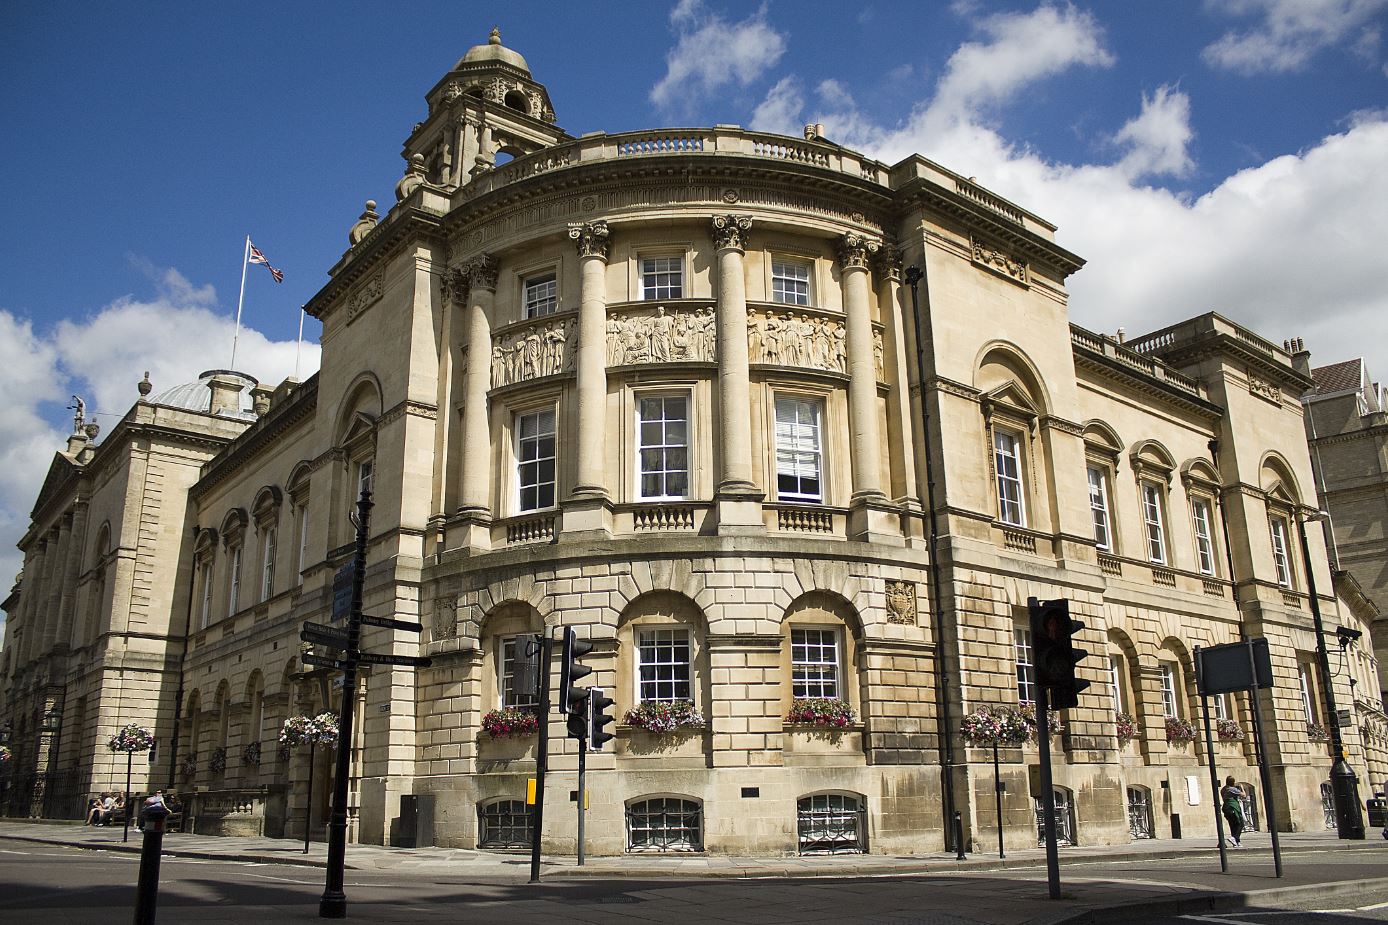 Image of the Guildhall in High Street Bath